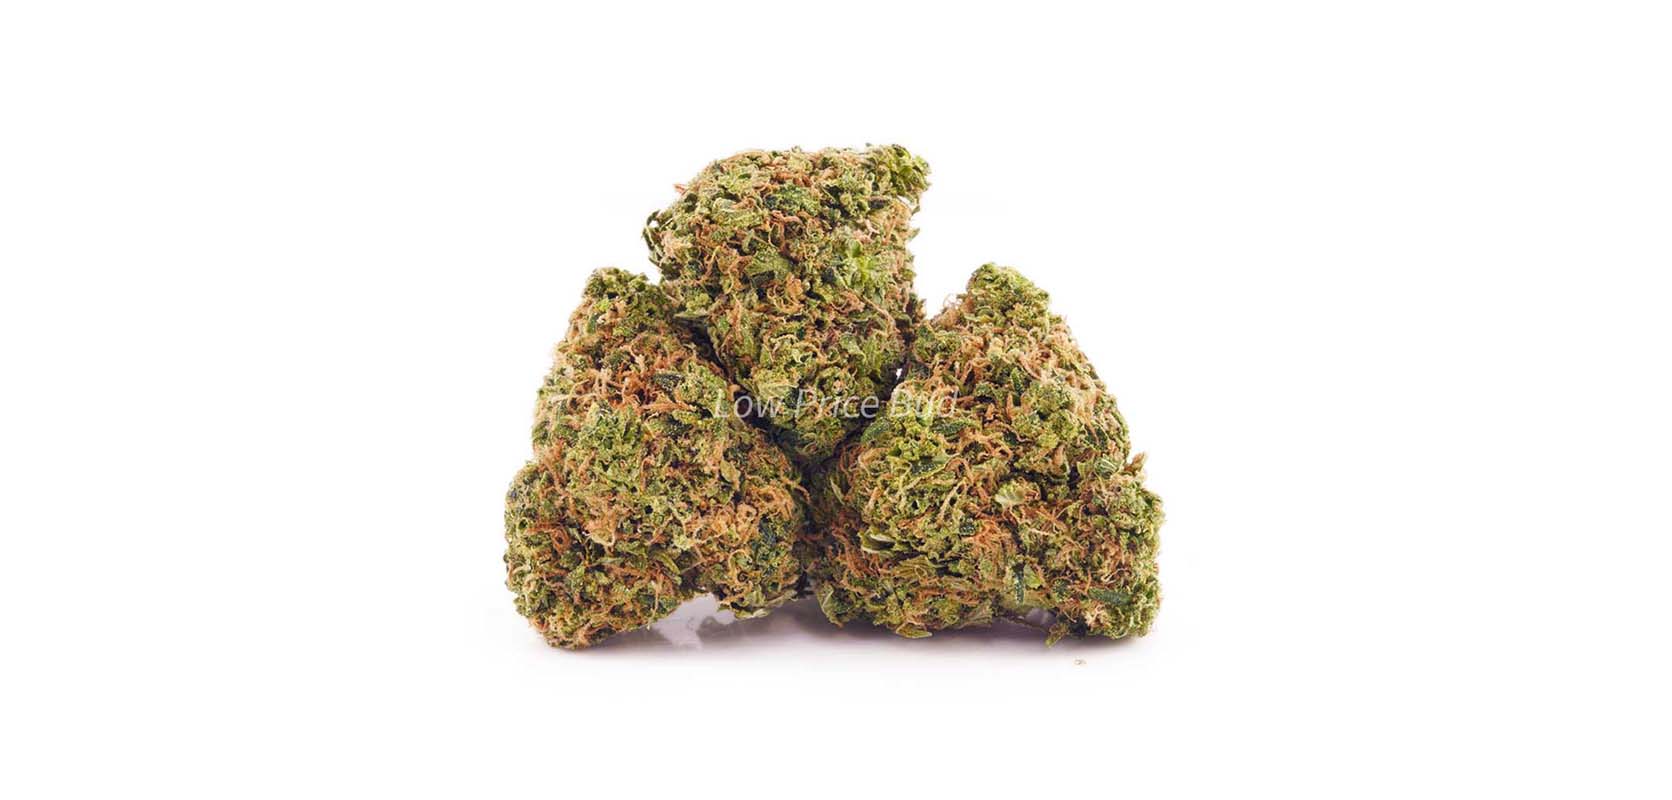 Sour Banana is a great alternative to the master scout strain. Buy weed online. Order weed online. Canadian online dispensary.